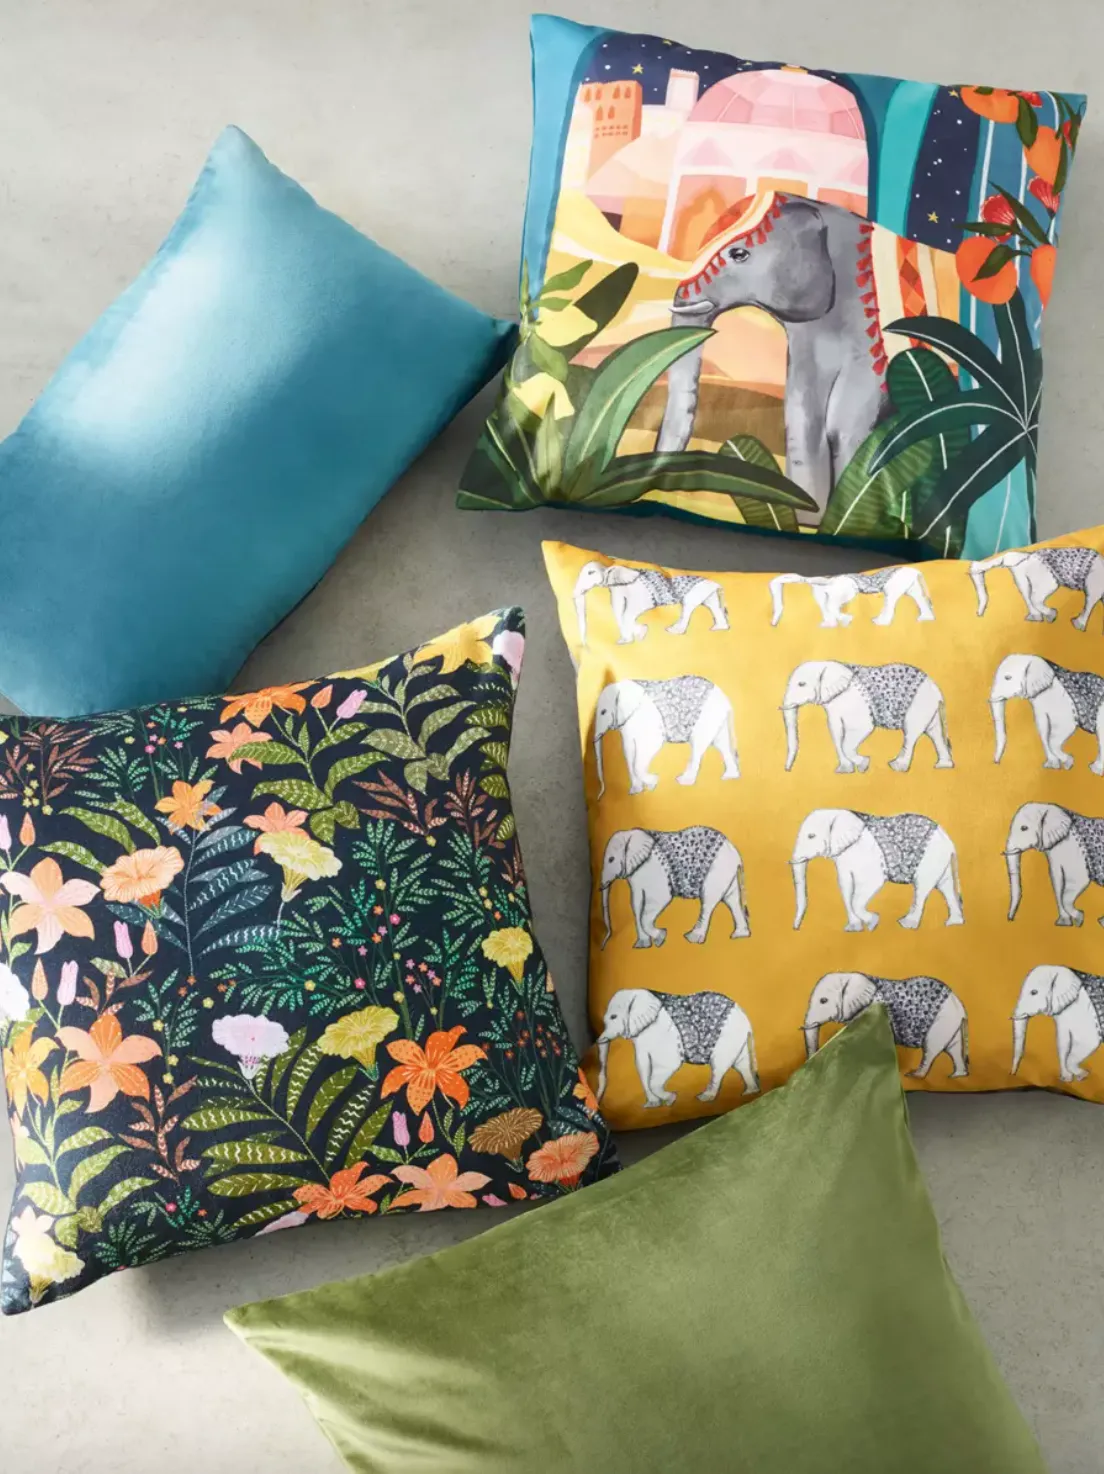 Cushions from £5, M&S